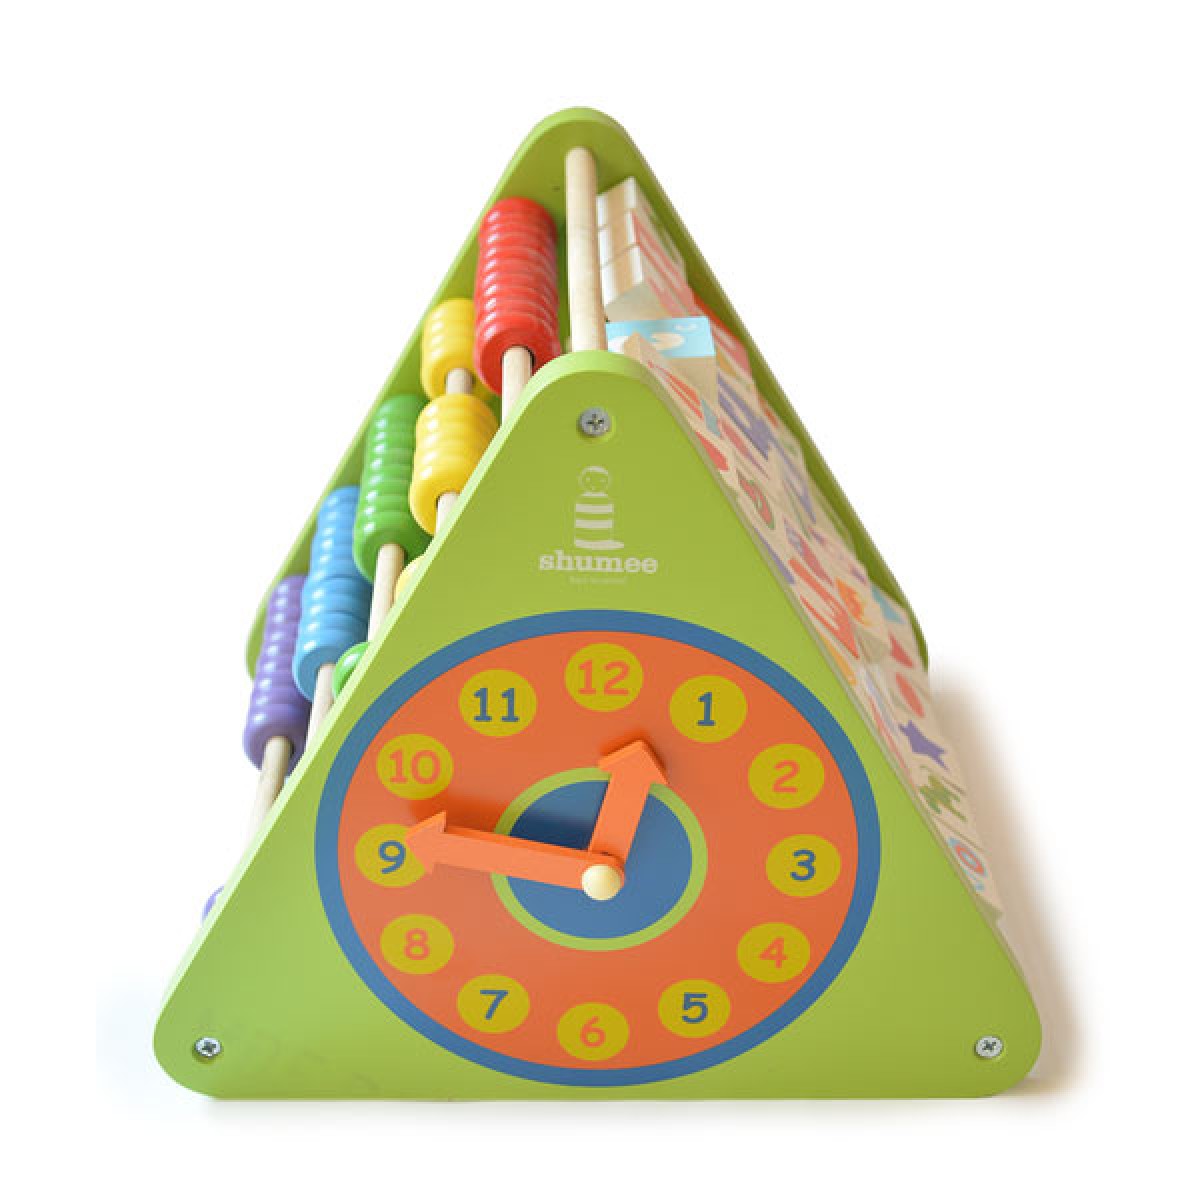 A Five-Sided Wooden Shumee Activity Triangle That Promises Hours Of Fun For Toddlers As They Explore The Alphabet, Numbers, Patterns, And More.